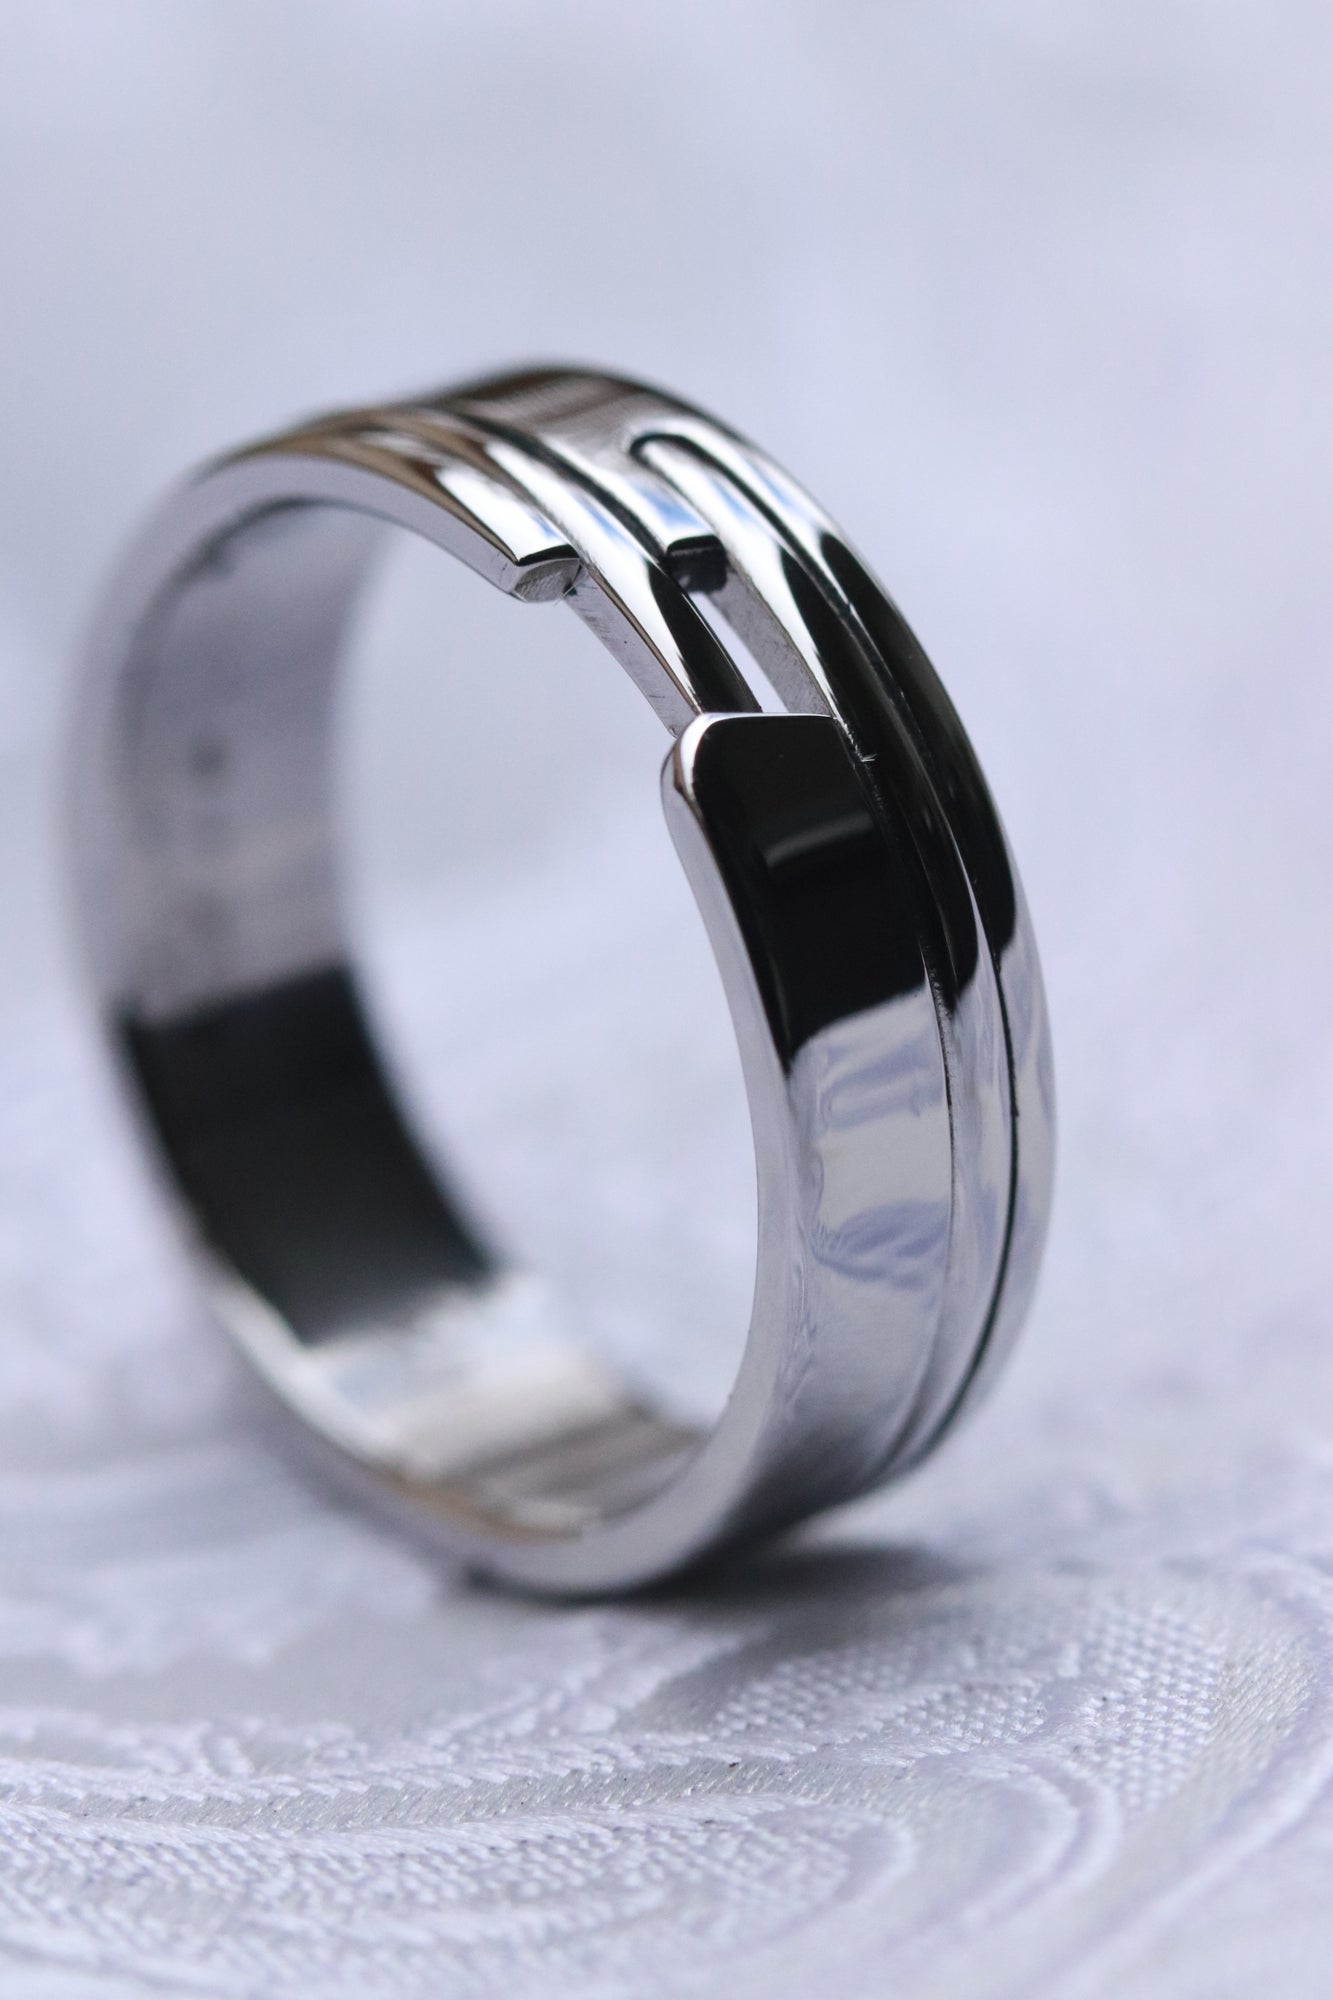 APPROXI2 handmade stainless steel ring (not casted) hypoallergenic rin –  JBlunt Designs, Inc.